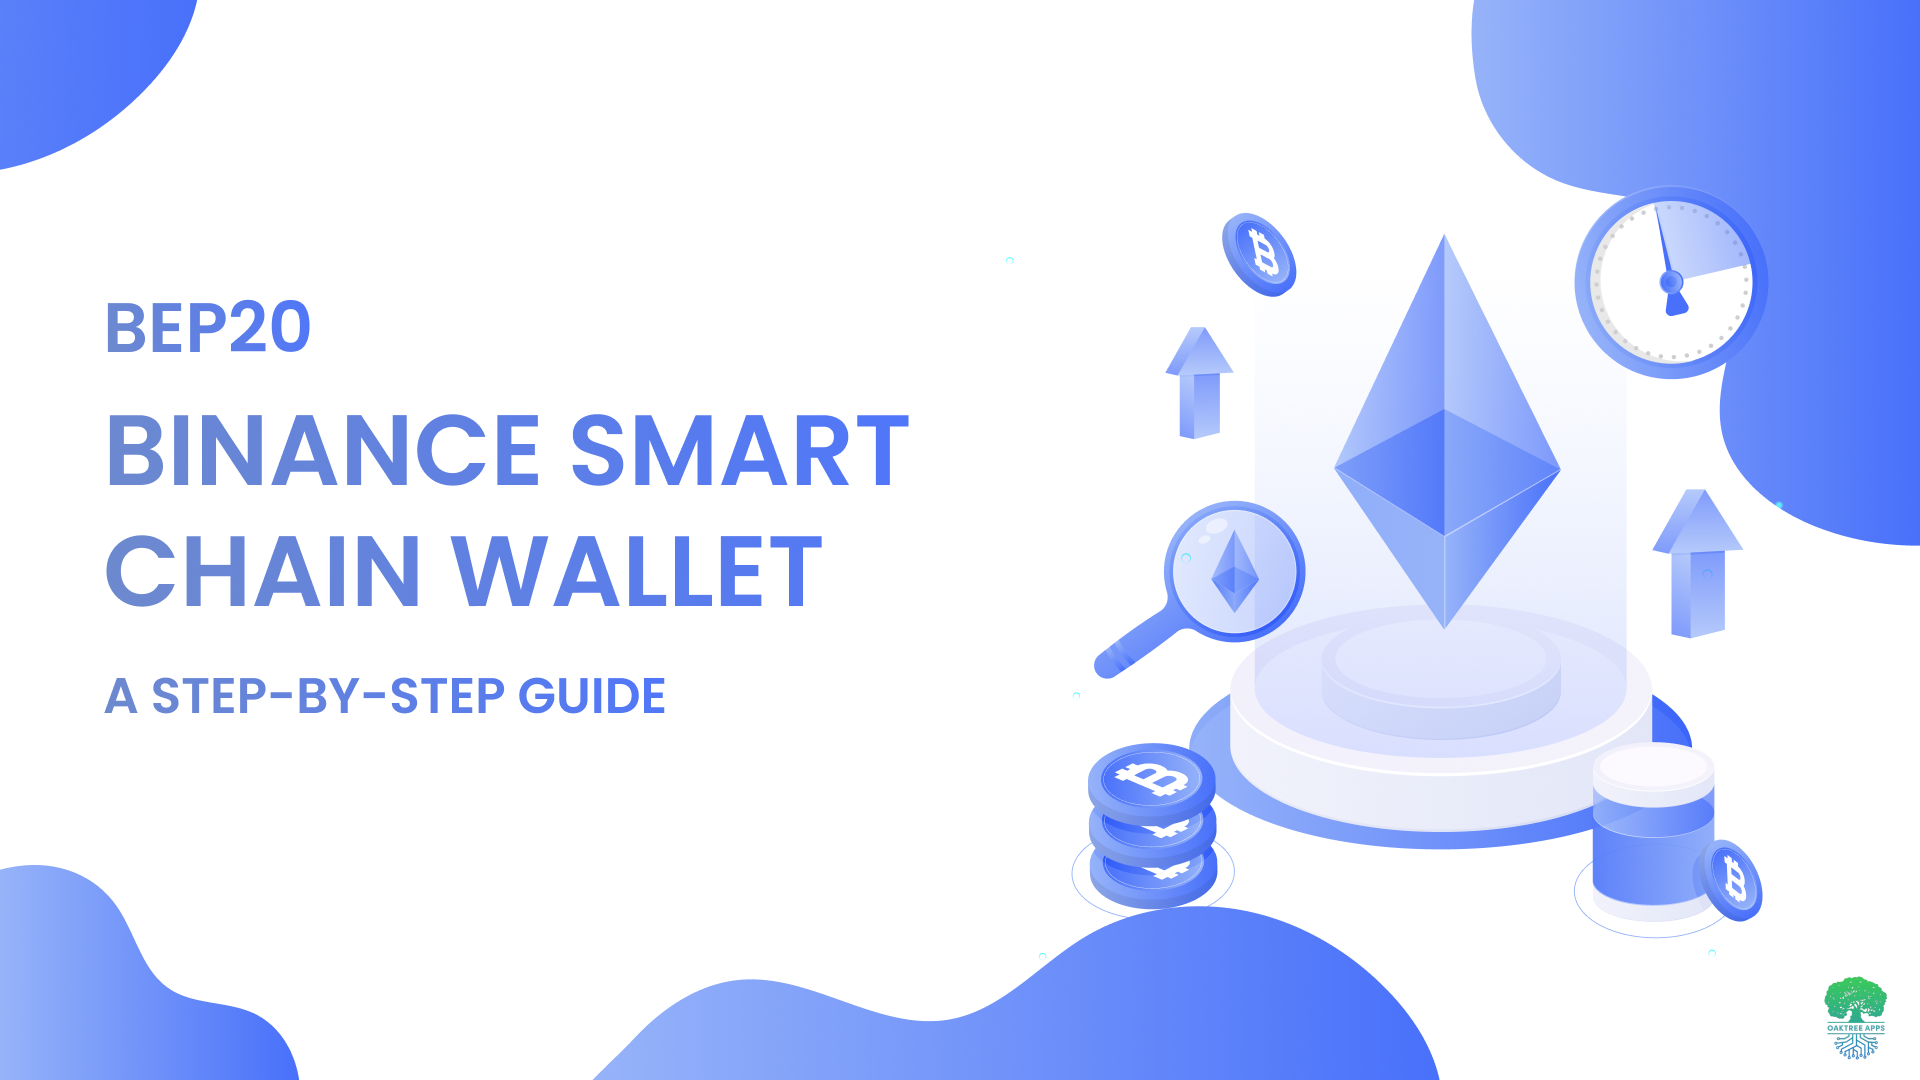 BEP20_Binance_Smart_Chain_Wallet_A_Step_by_Step_Guide.png